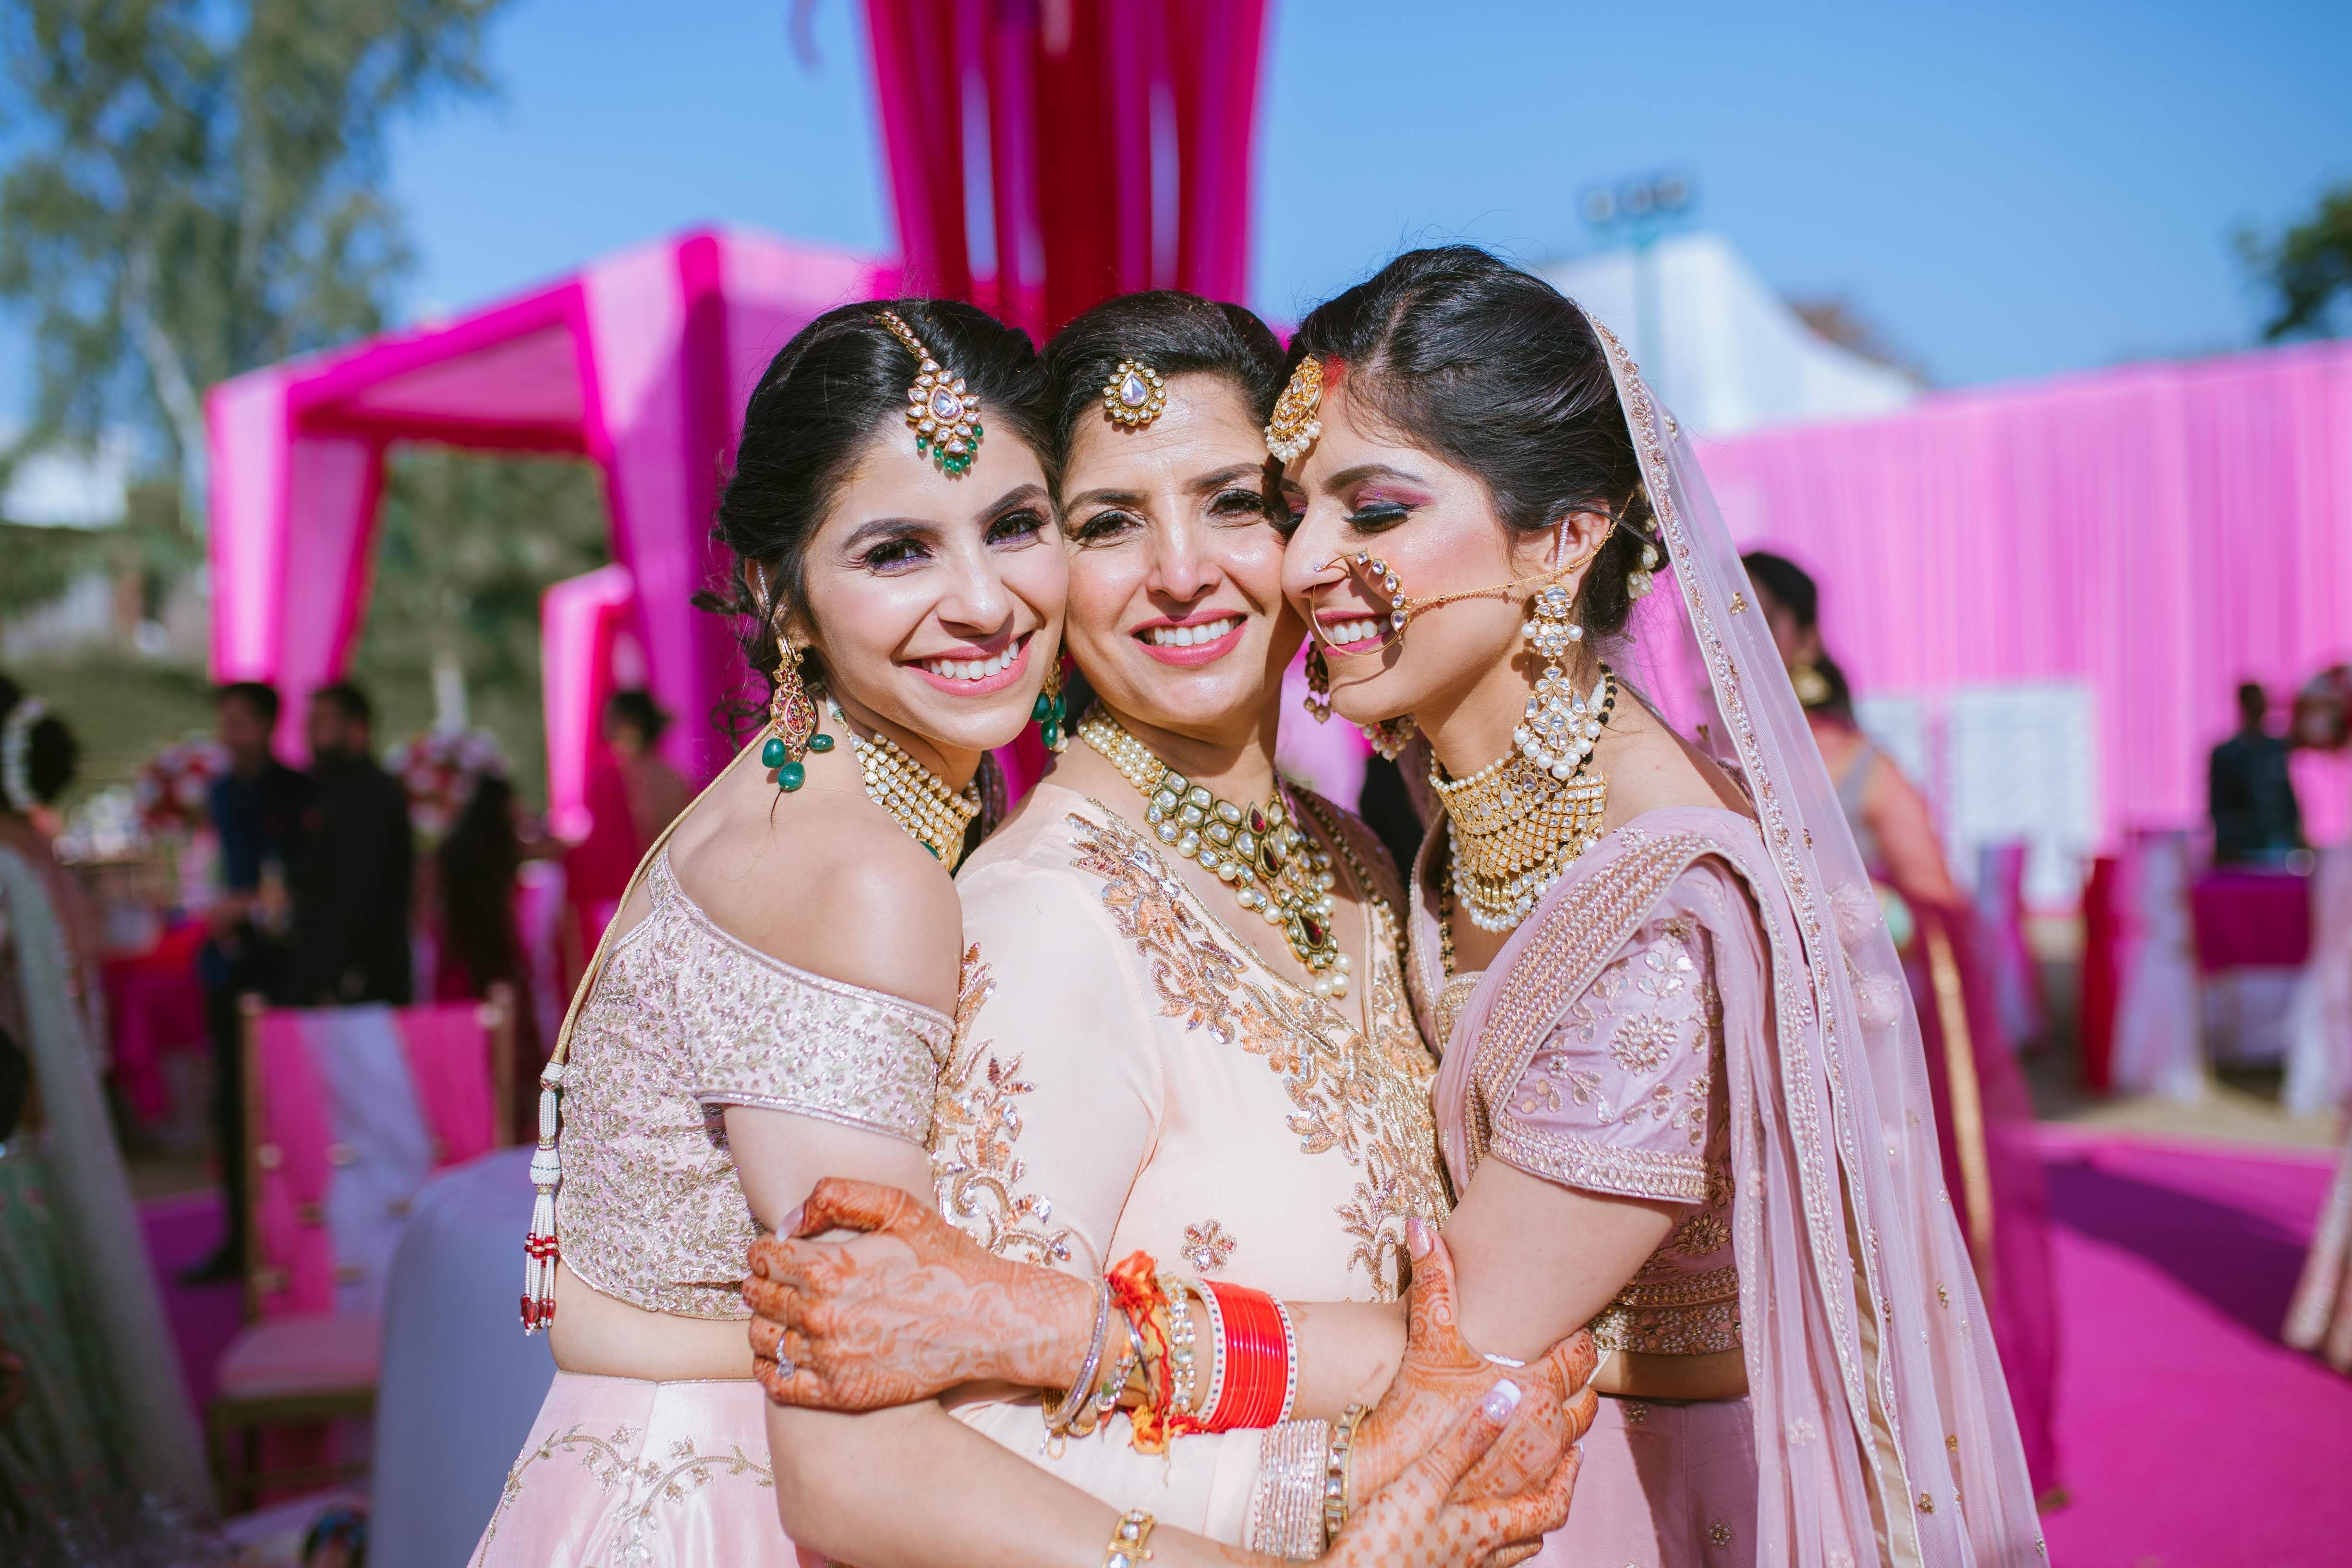 Sisters poses for wedding | Sisters photoshoot poses, Indian wedding  photography poses, Sister poses